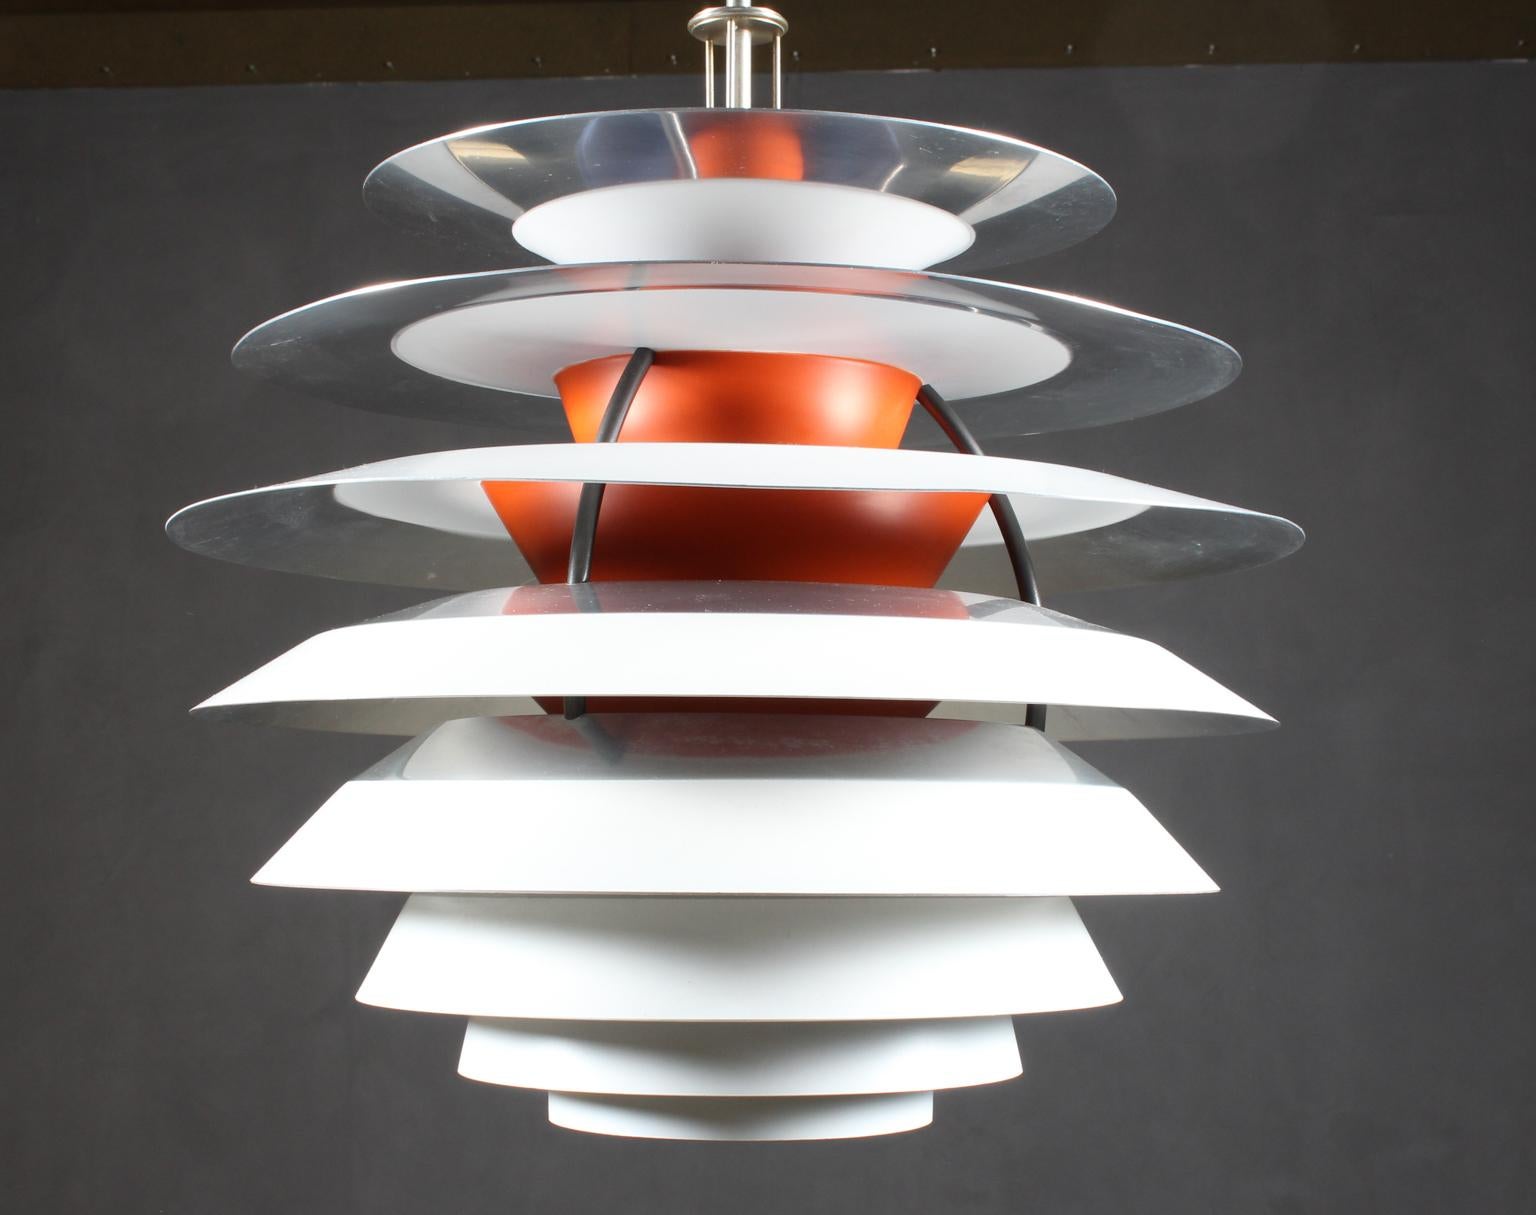 Poul Henningsen pendant with 10 shades each with four different surfaces. Adjustable pendant tube for regulating the contrast lightning.

Made by Louis Poulsen.

Bottom shade missing.